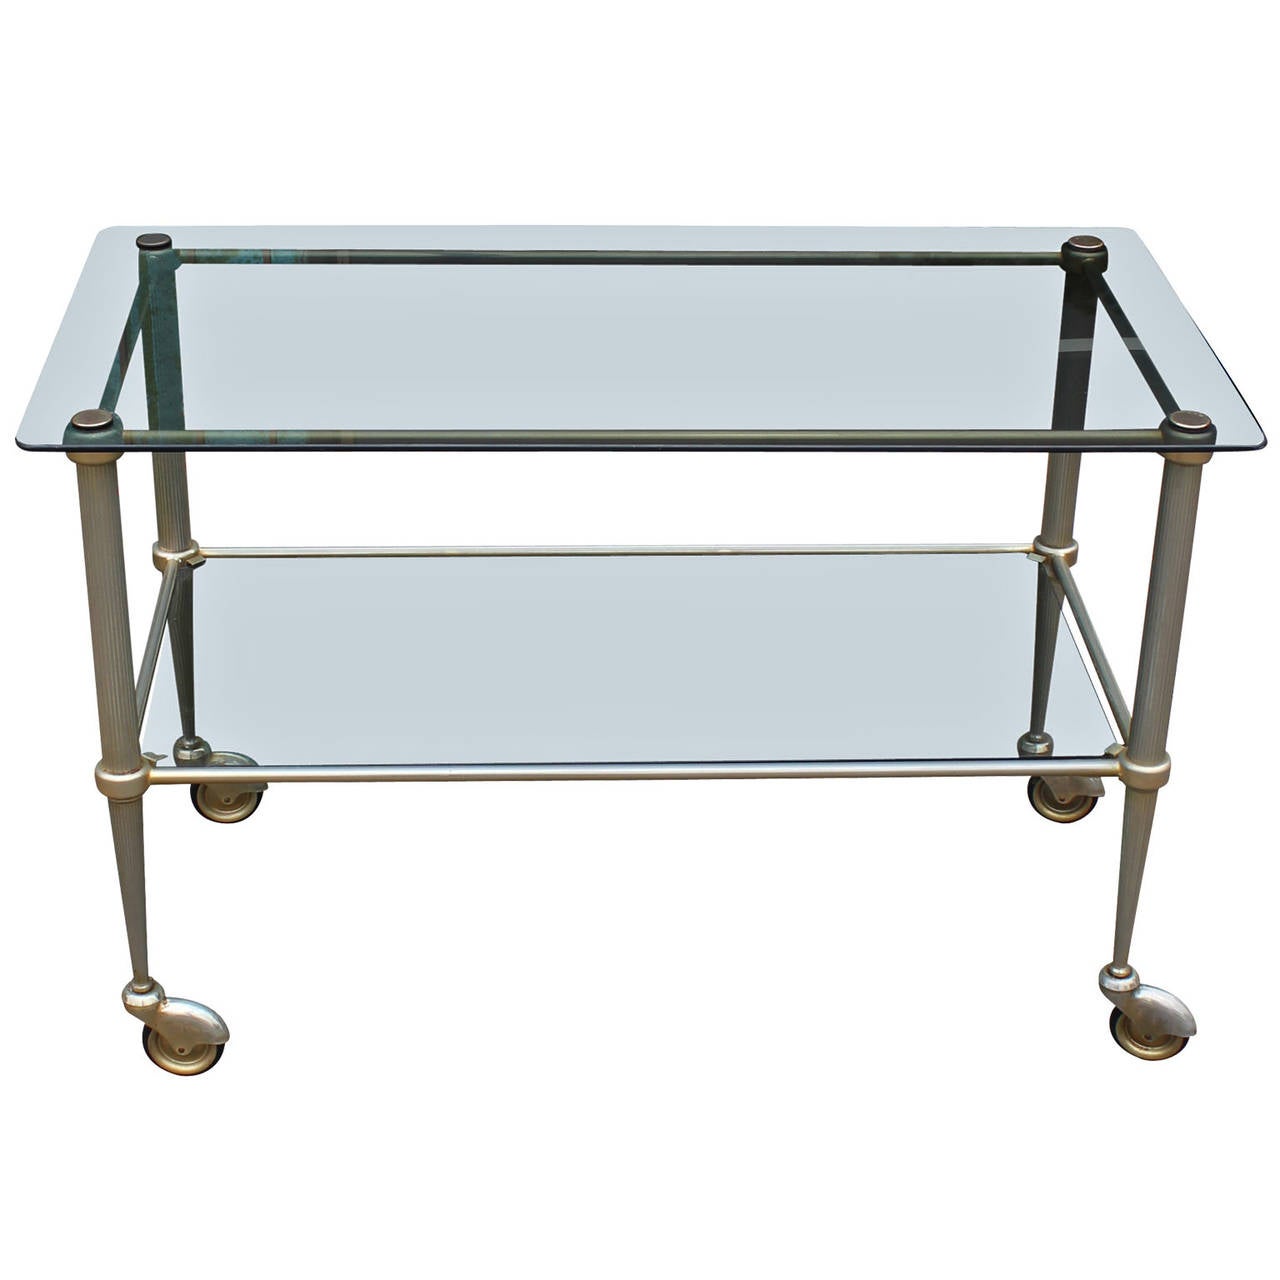 Beautiful bar cart in a soft aged brass. Cart is fitted with two smoked glass shelves. Cart has delicate tapered legs. Perfect in a Hollywood Regency interior.